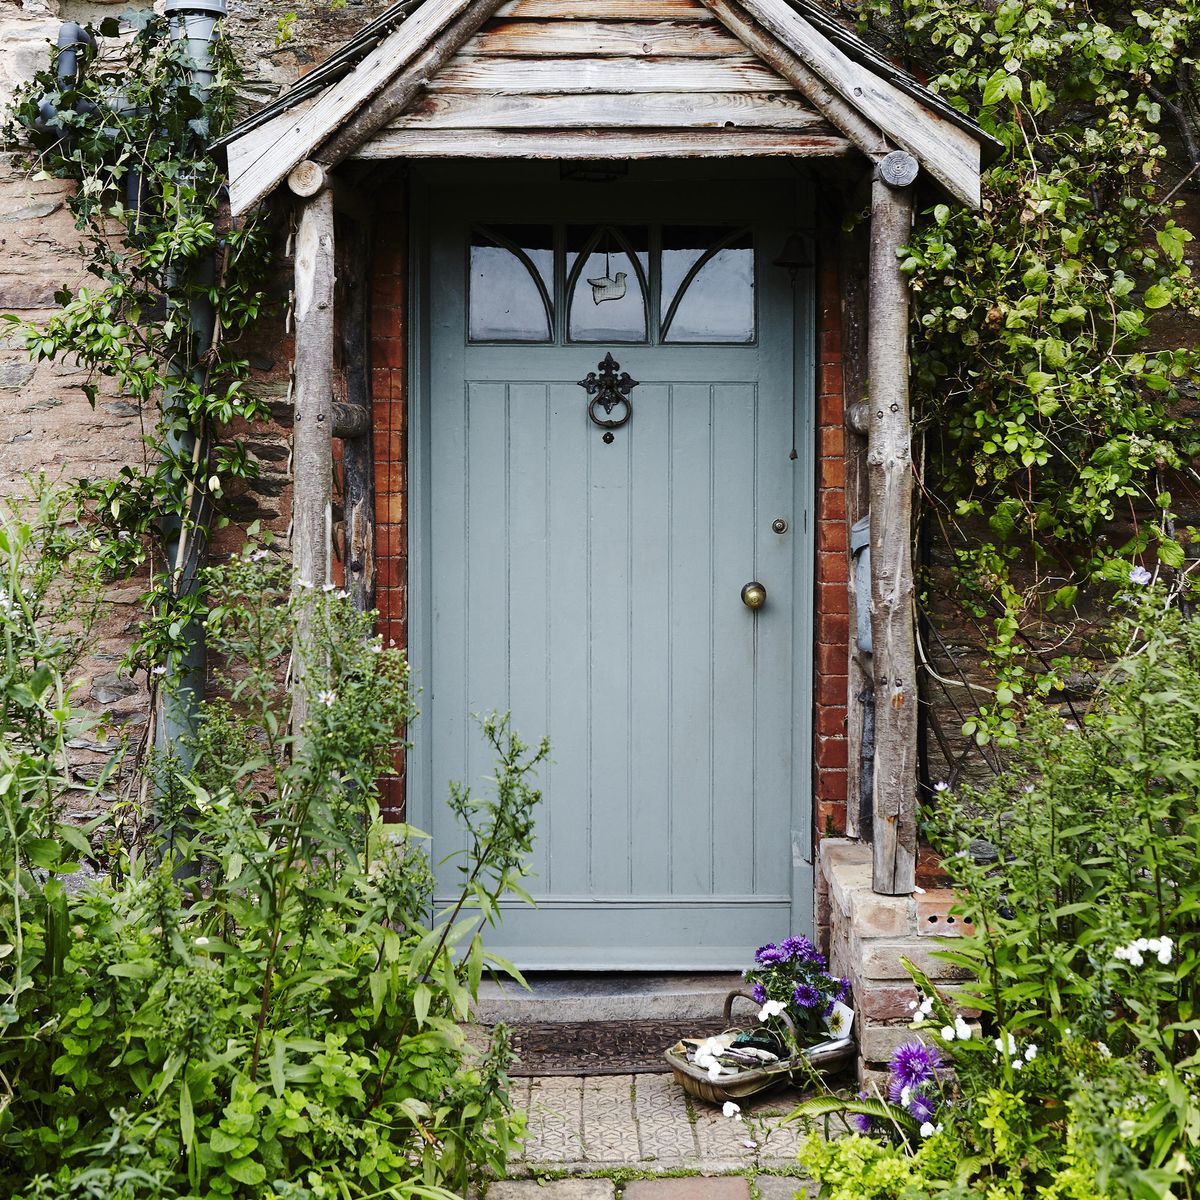 10 Small front garden ideas to make a great first impression